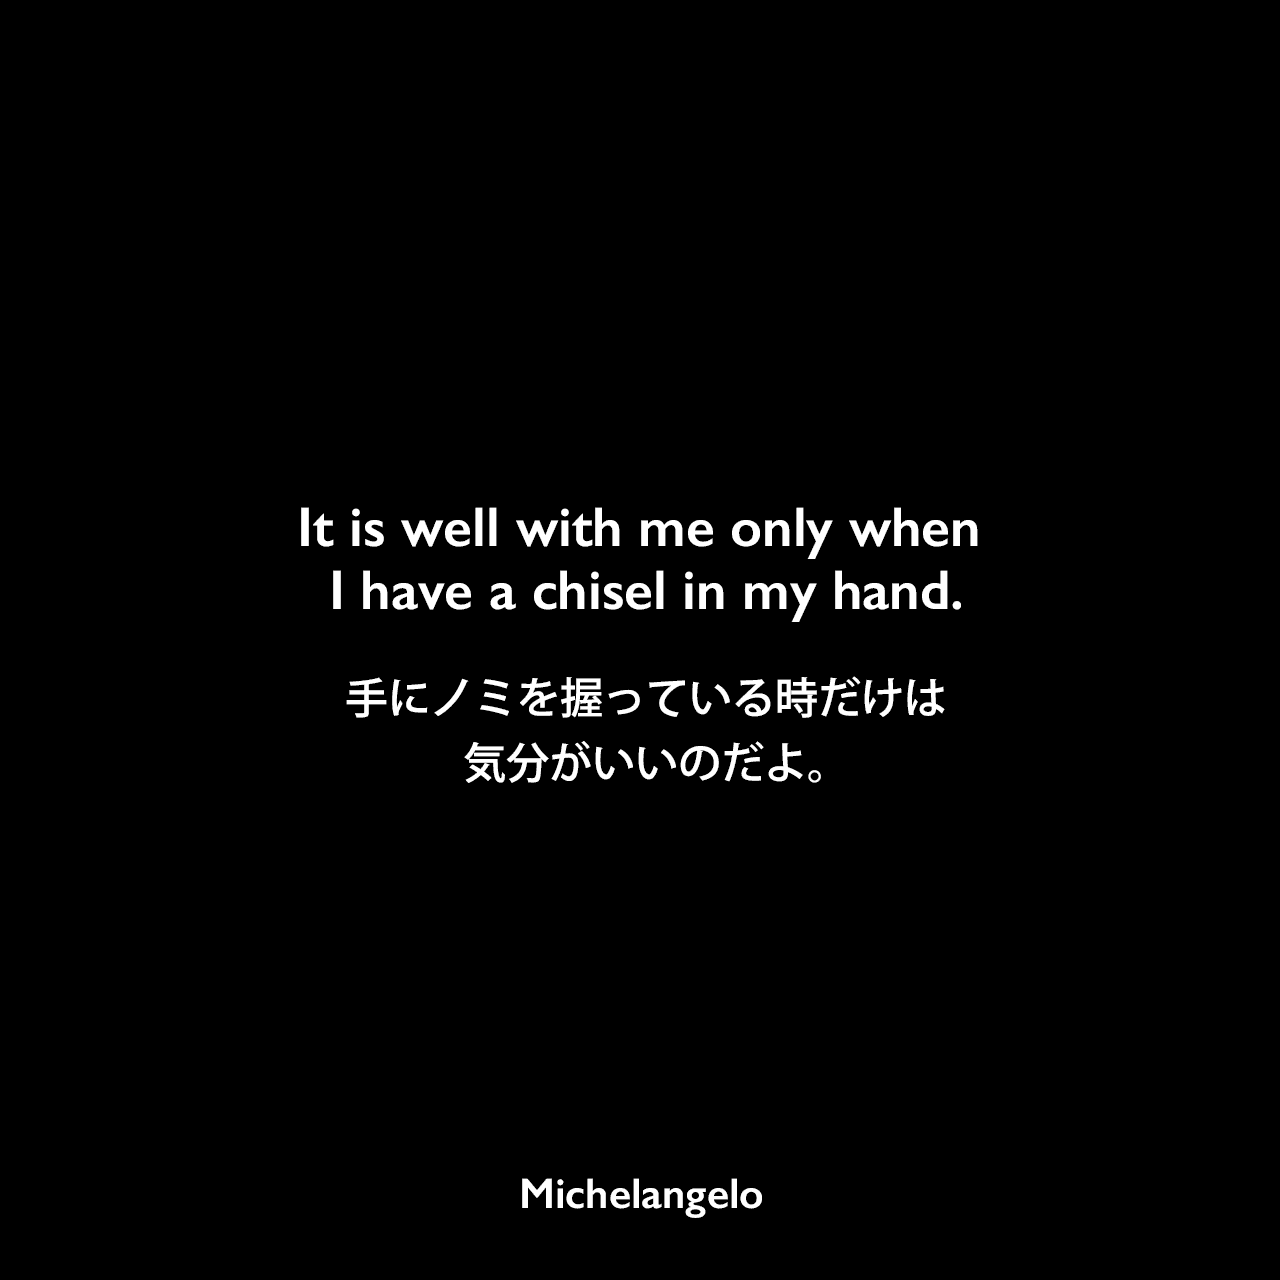 It is well with me only when I have a chisel in my hand.手にノミを握っている時だけは気分がいいのだよ。Michelangelo